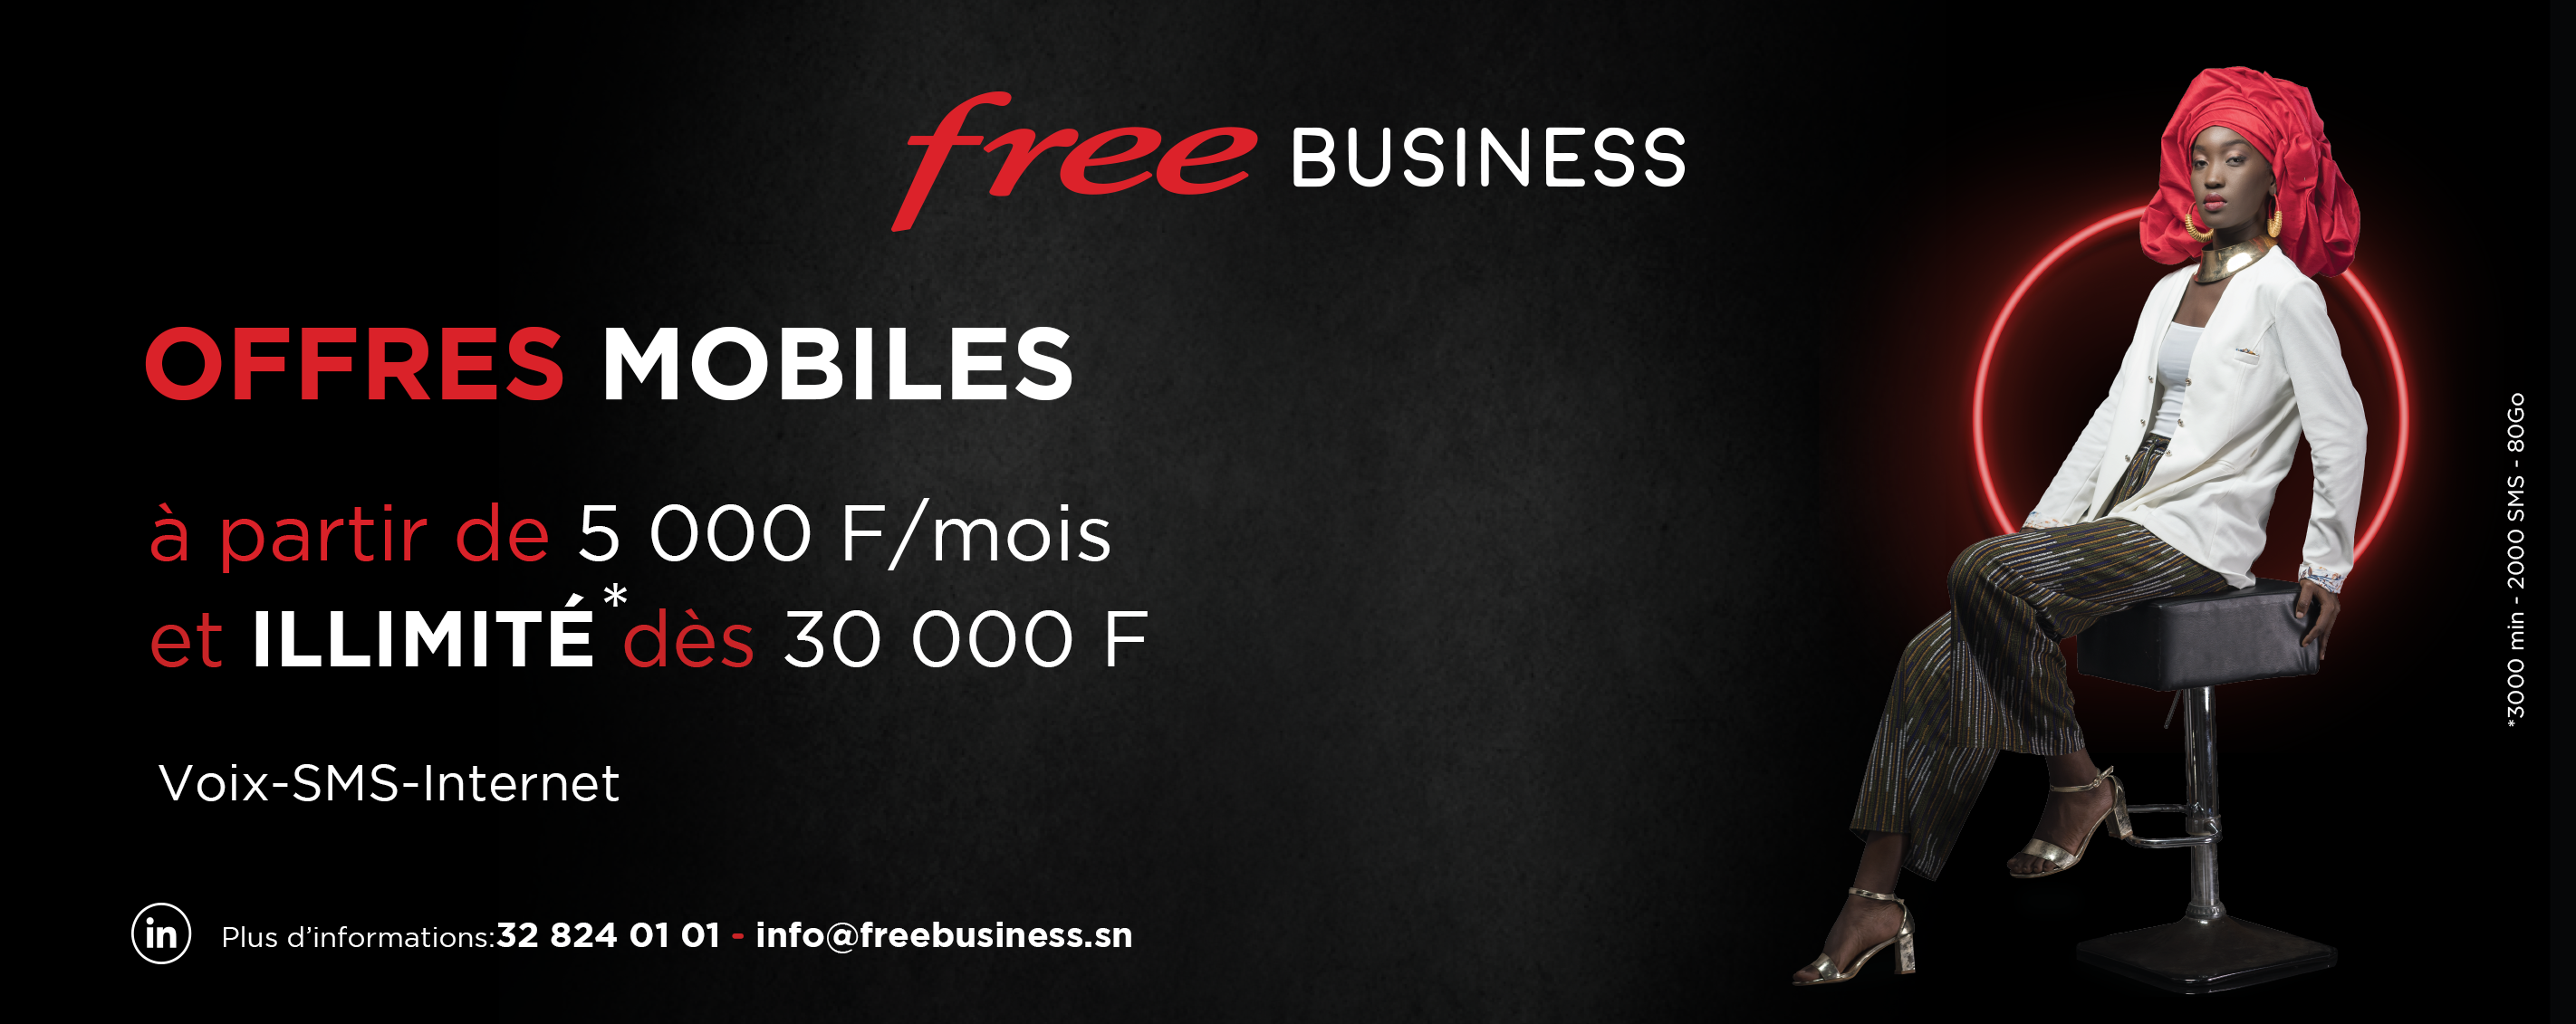 Offres mobile business